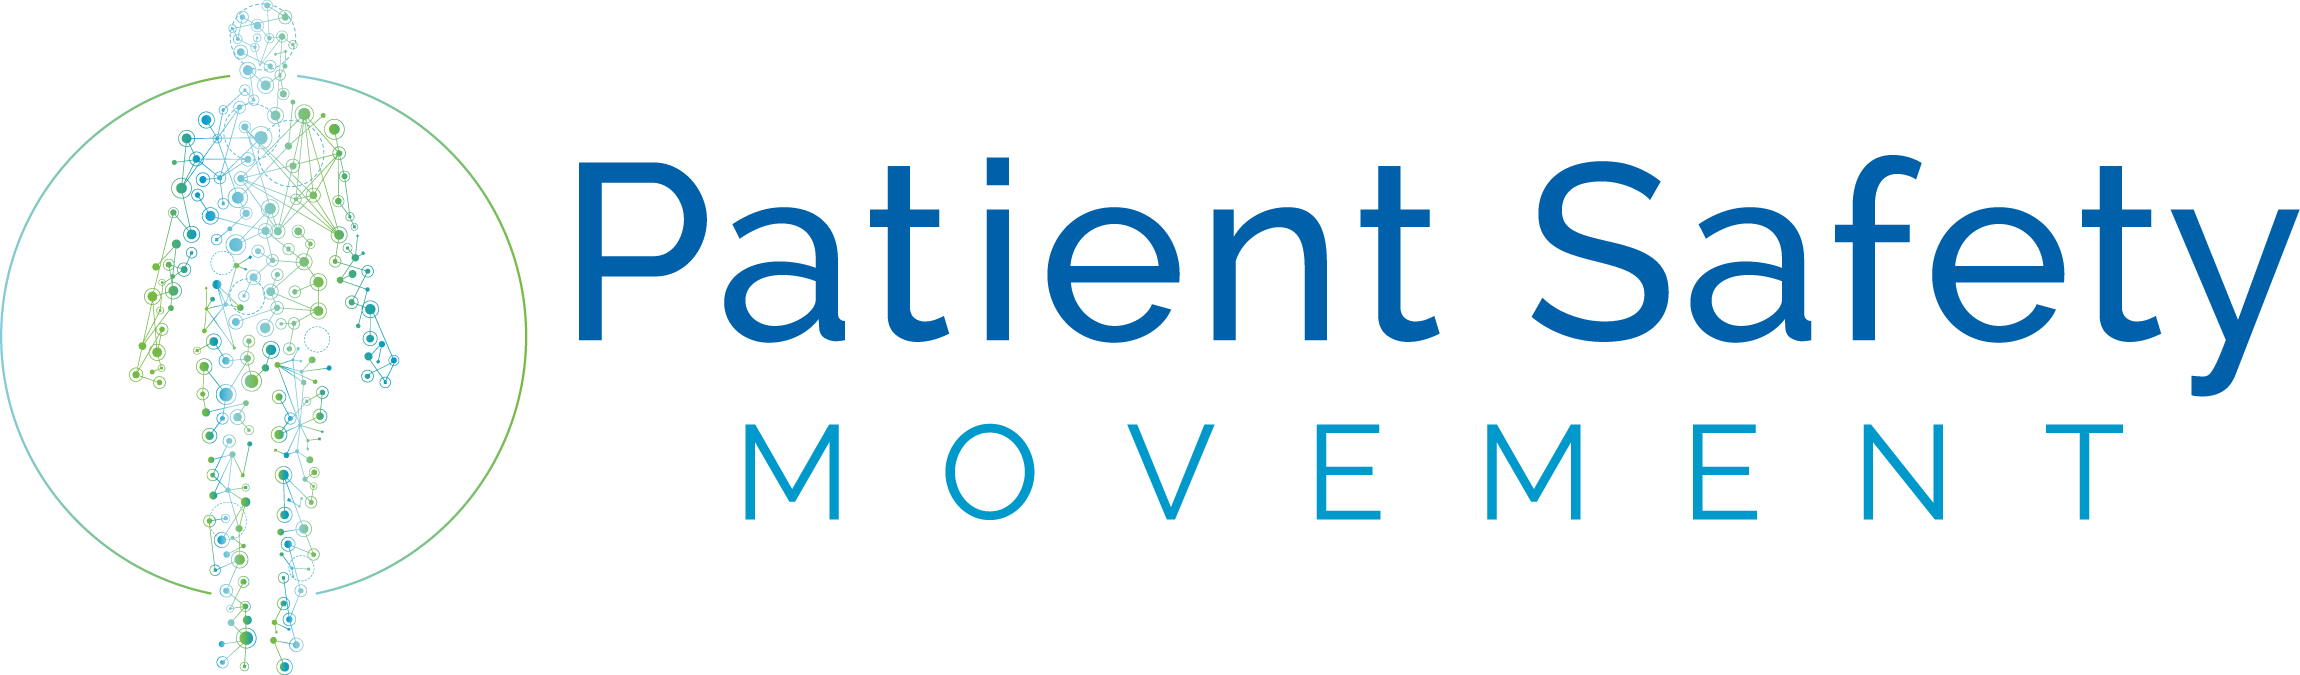 patient_safety_movement